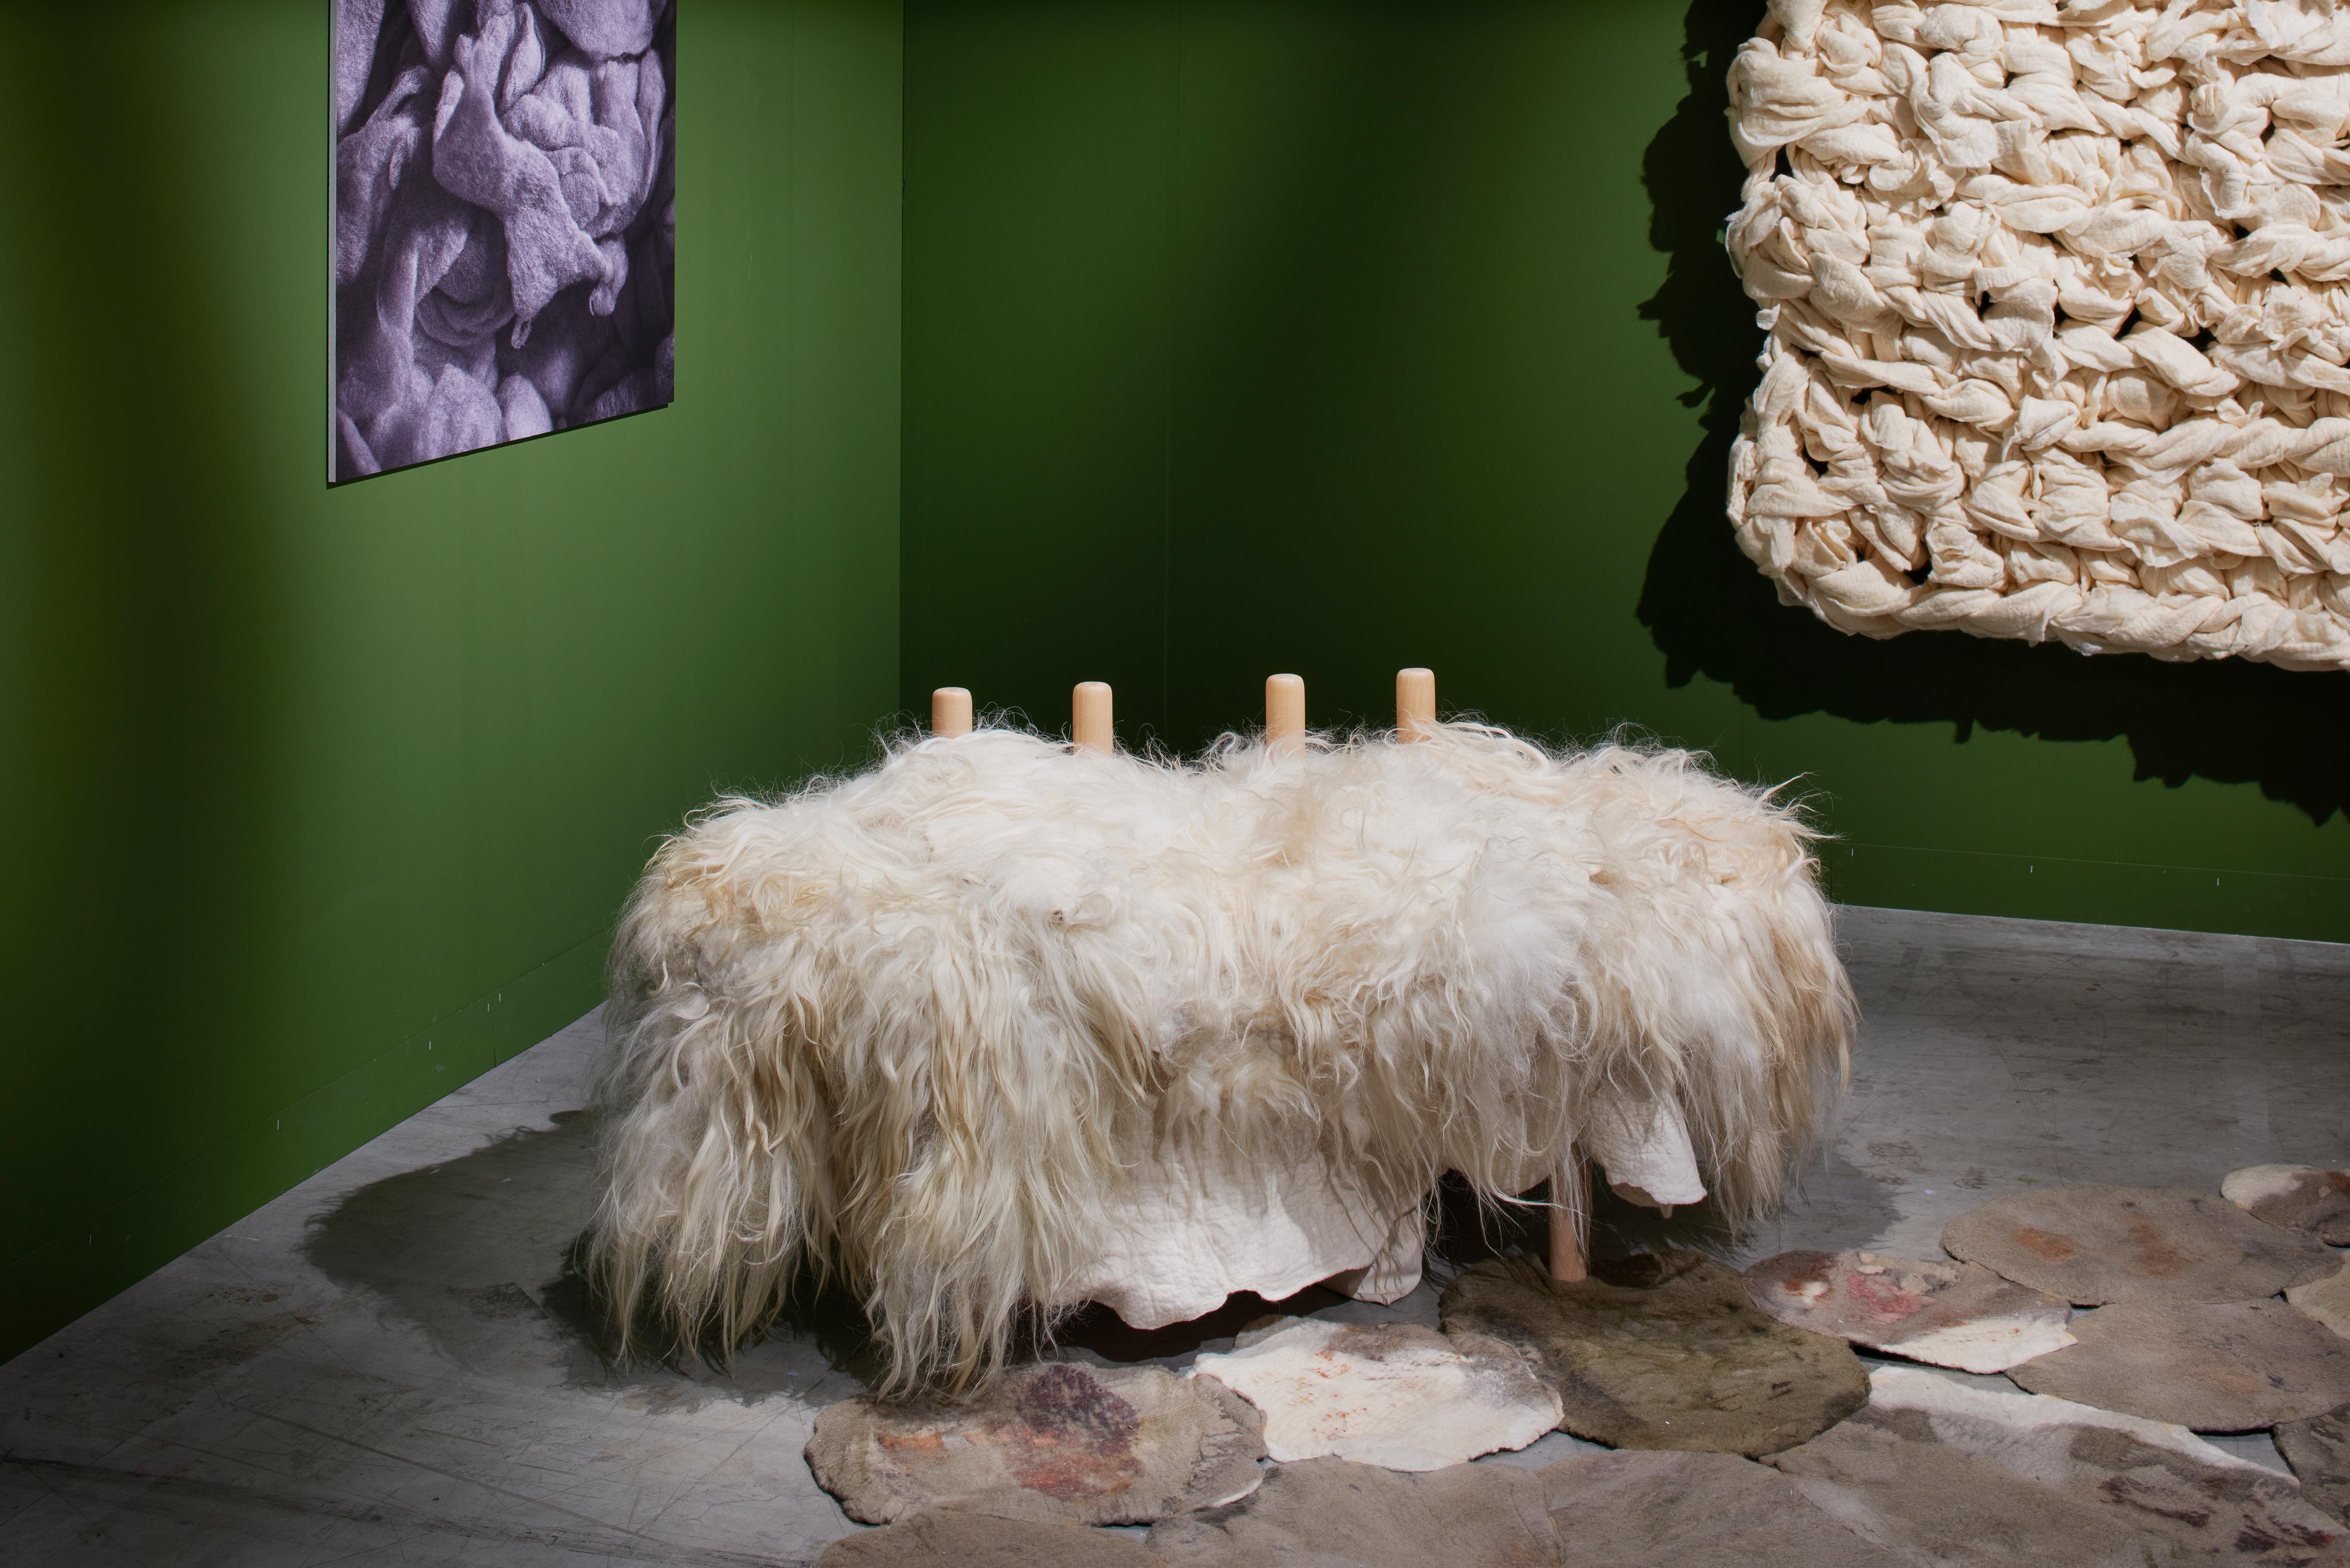 “Solito” Bench in Wool and Wood by Inês Schertel, Brazil, 2021

Ines Schertel's primary material is sheep's wool. As a practitioner of Slow Design, the artist takes a holistic approach to textile design, personally overseeing the whole process